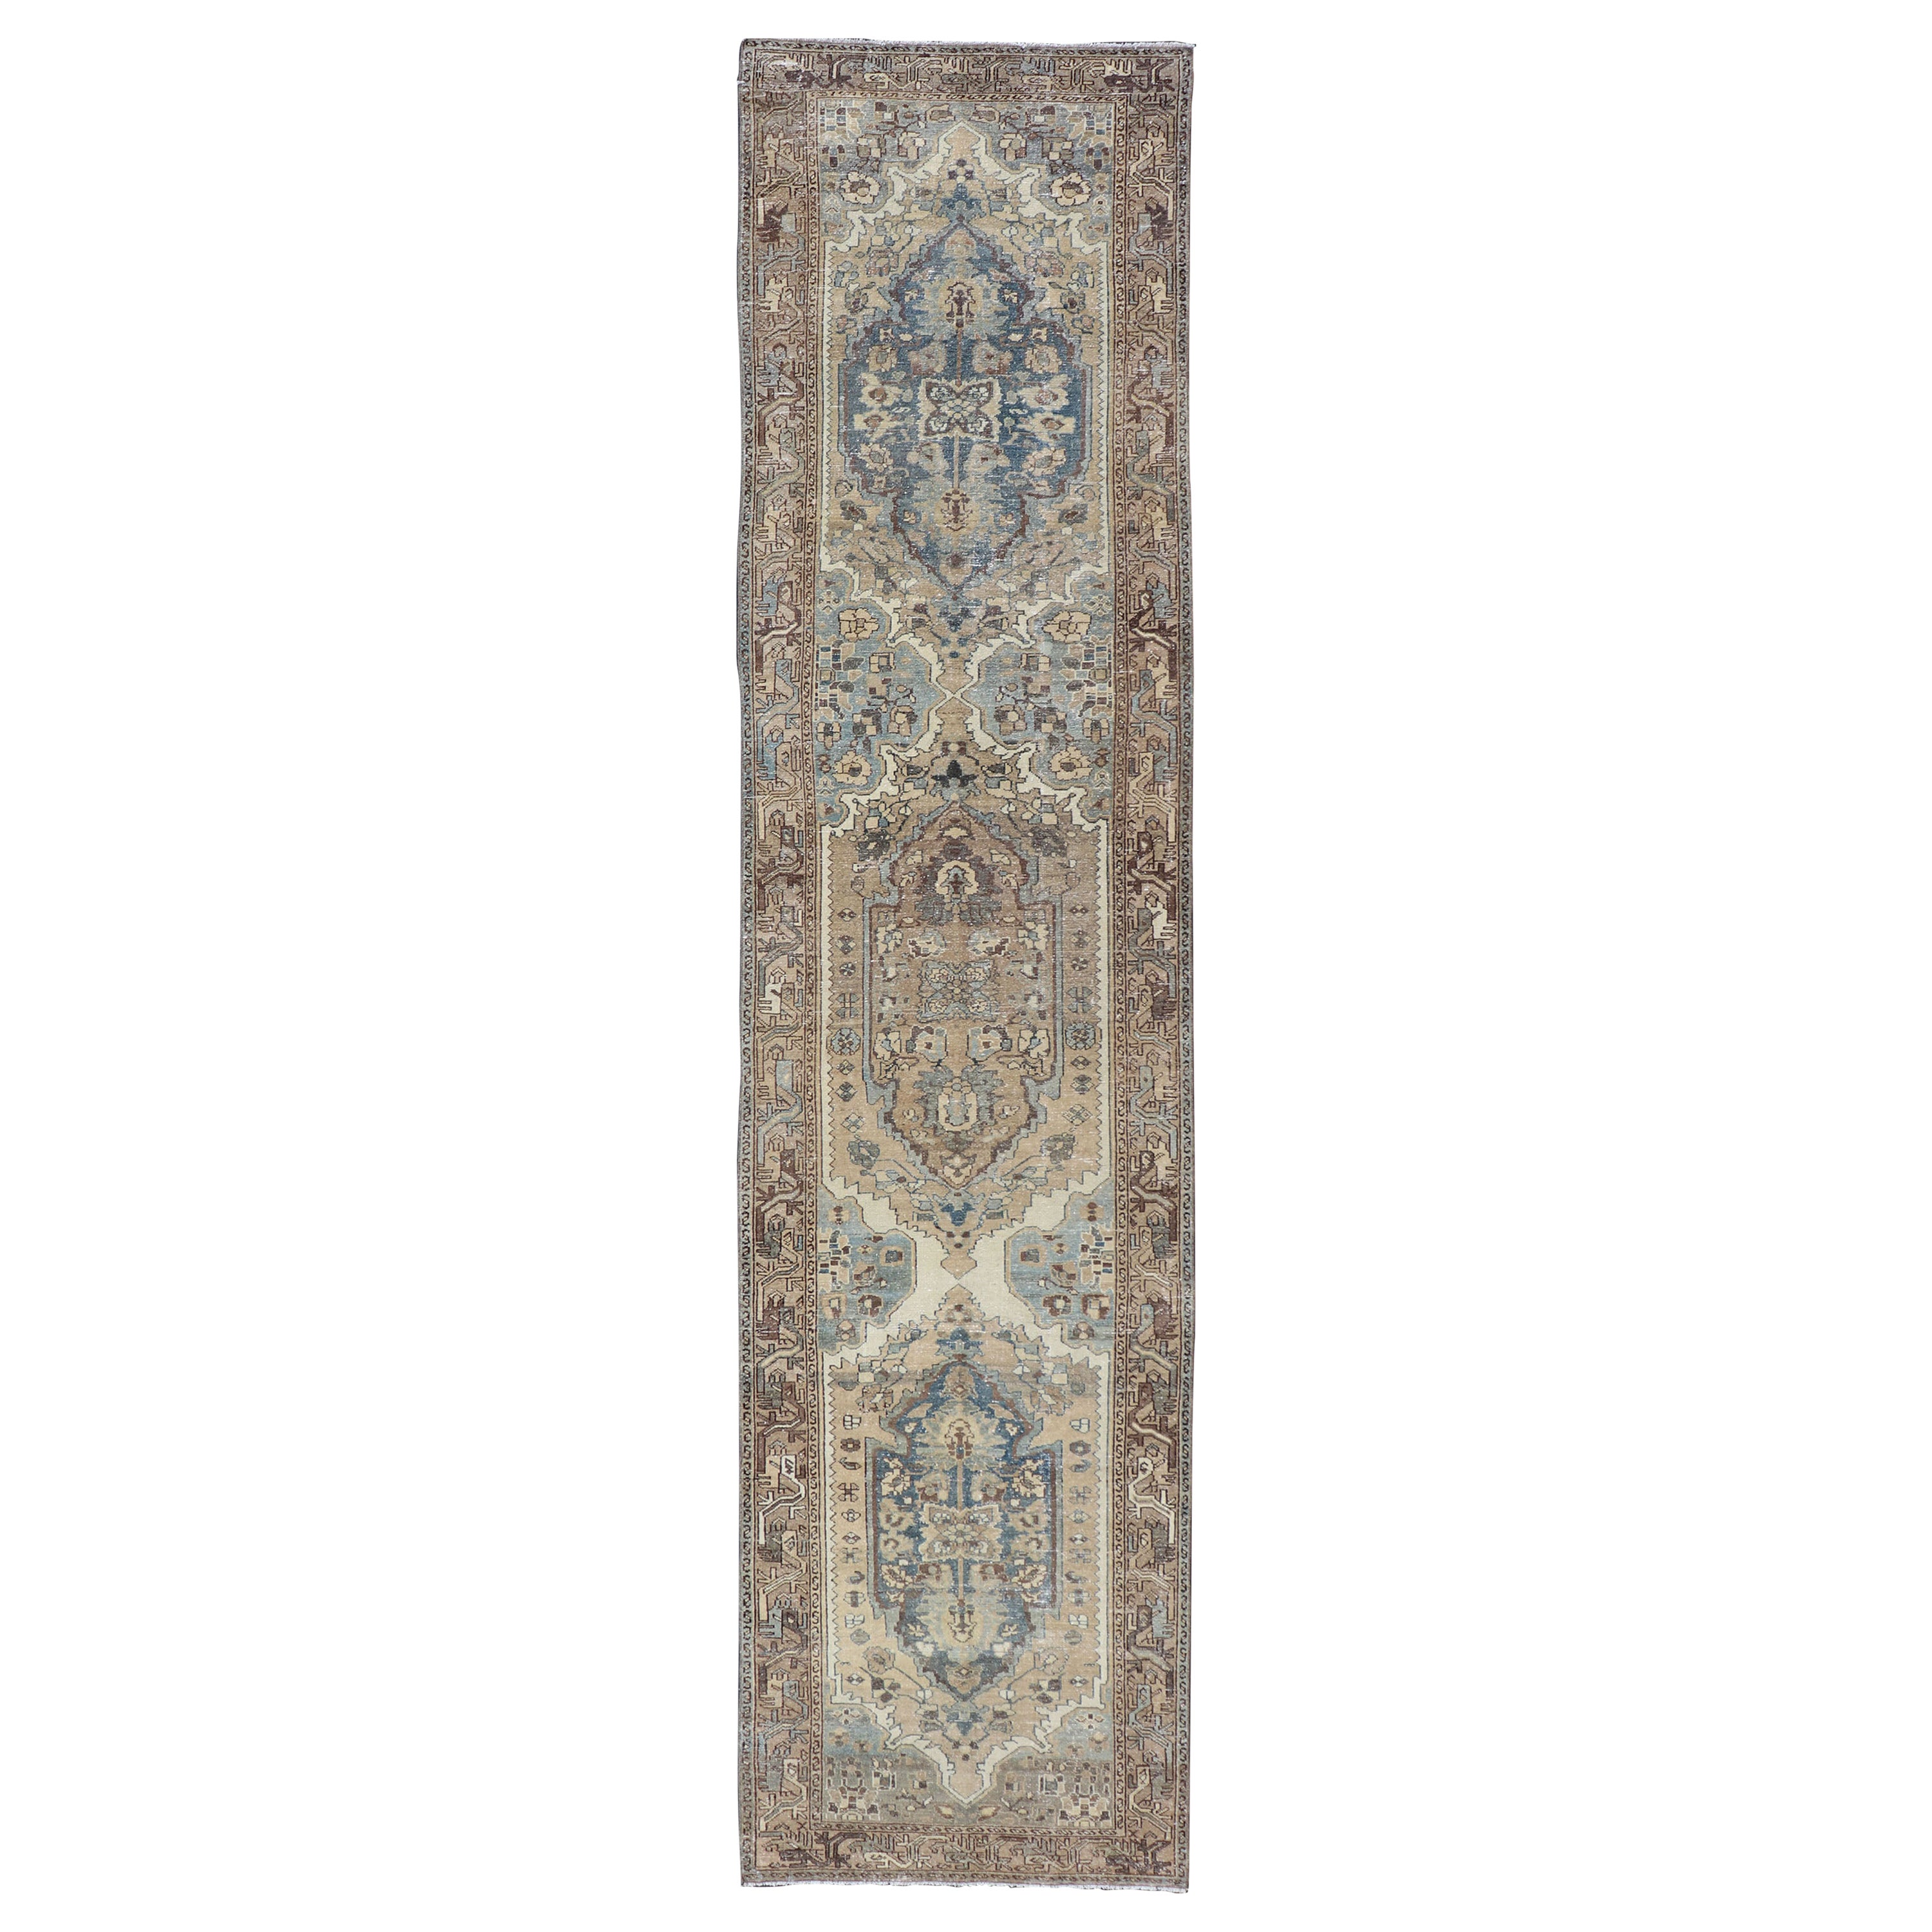 Antique Persian Malayer Runner With Geometric Medallion Design in Blue and Tan